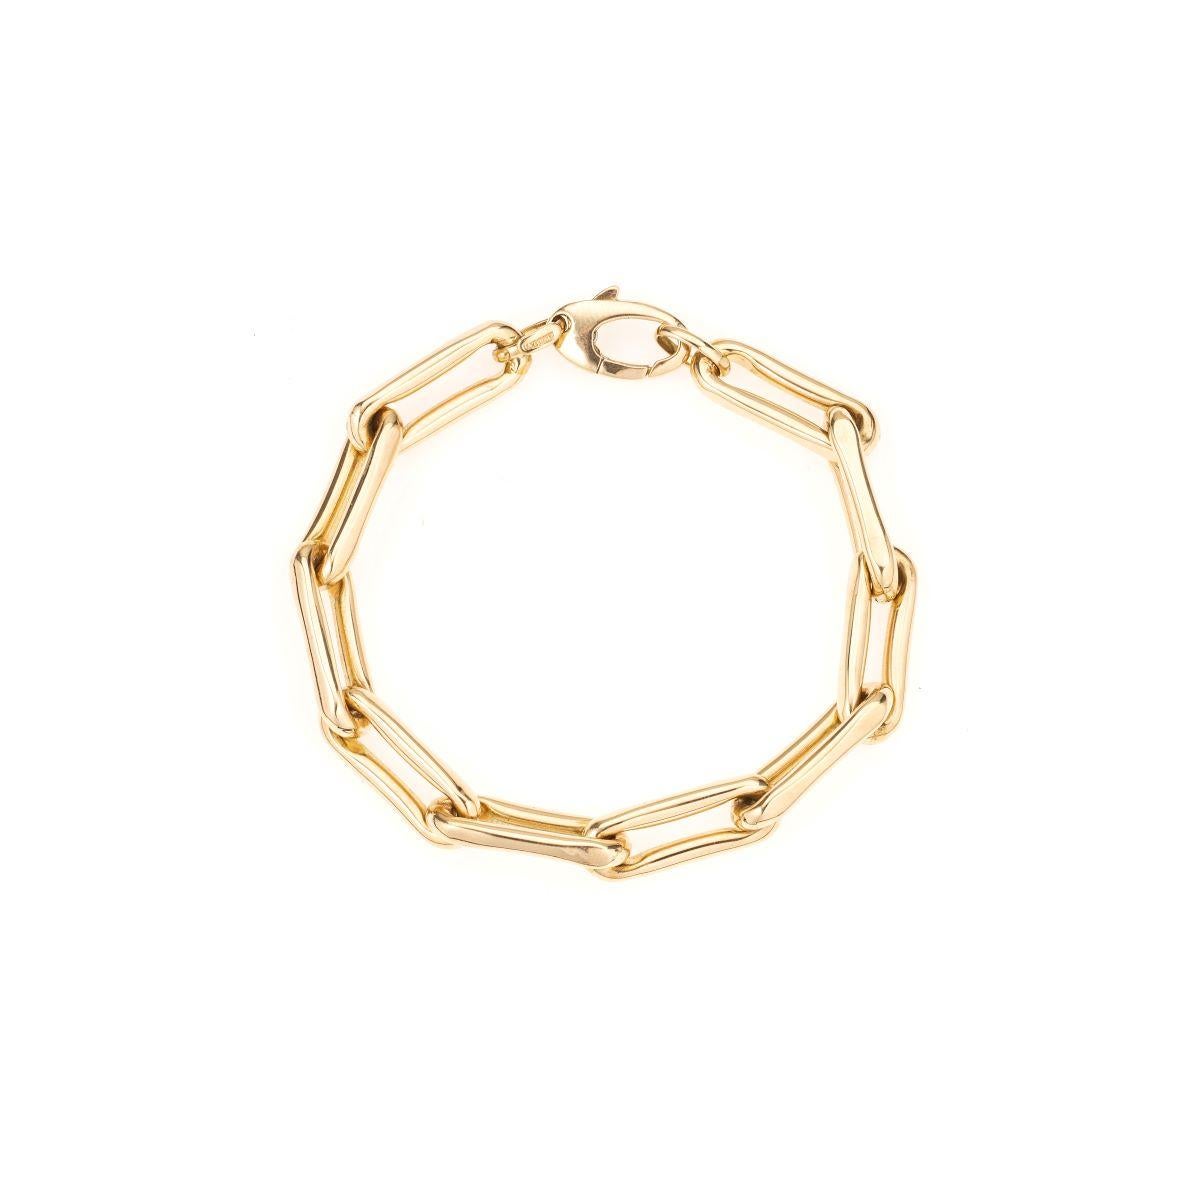 14K yellow gold one of a kind bamboo heavy chain bracelet. 

Measurements